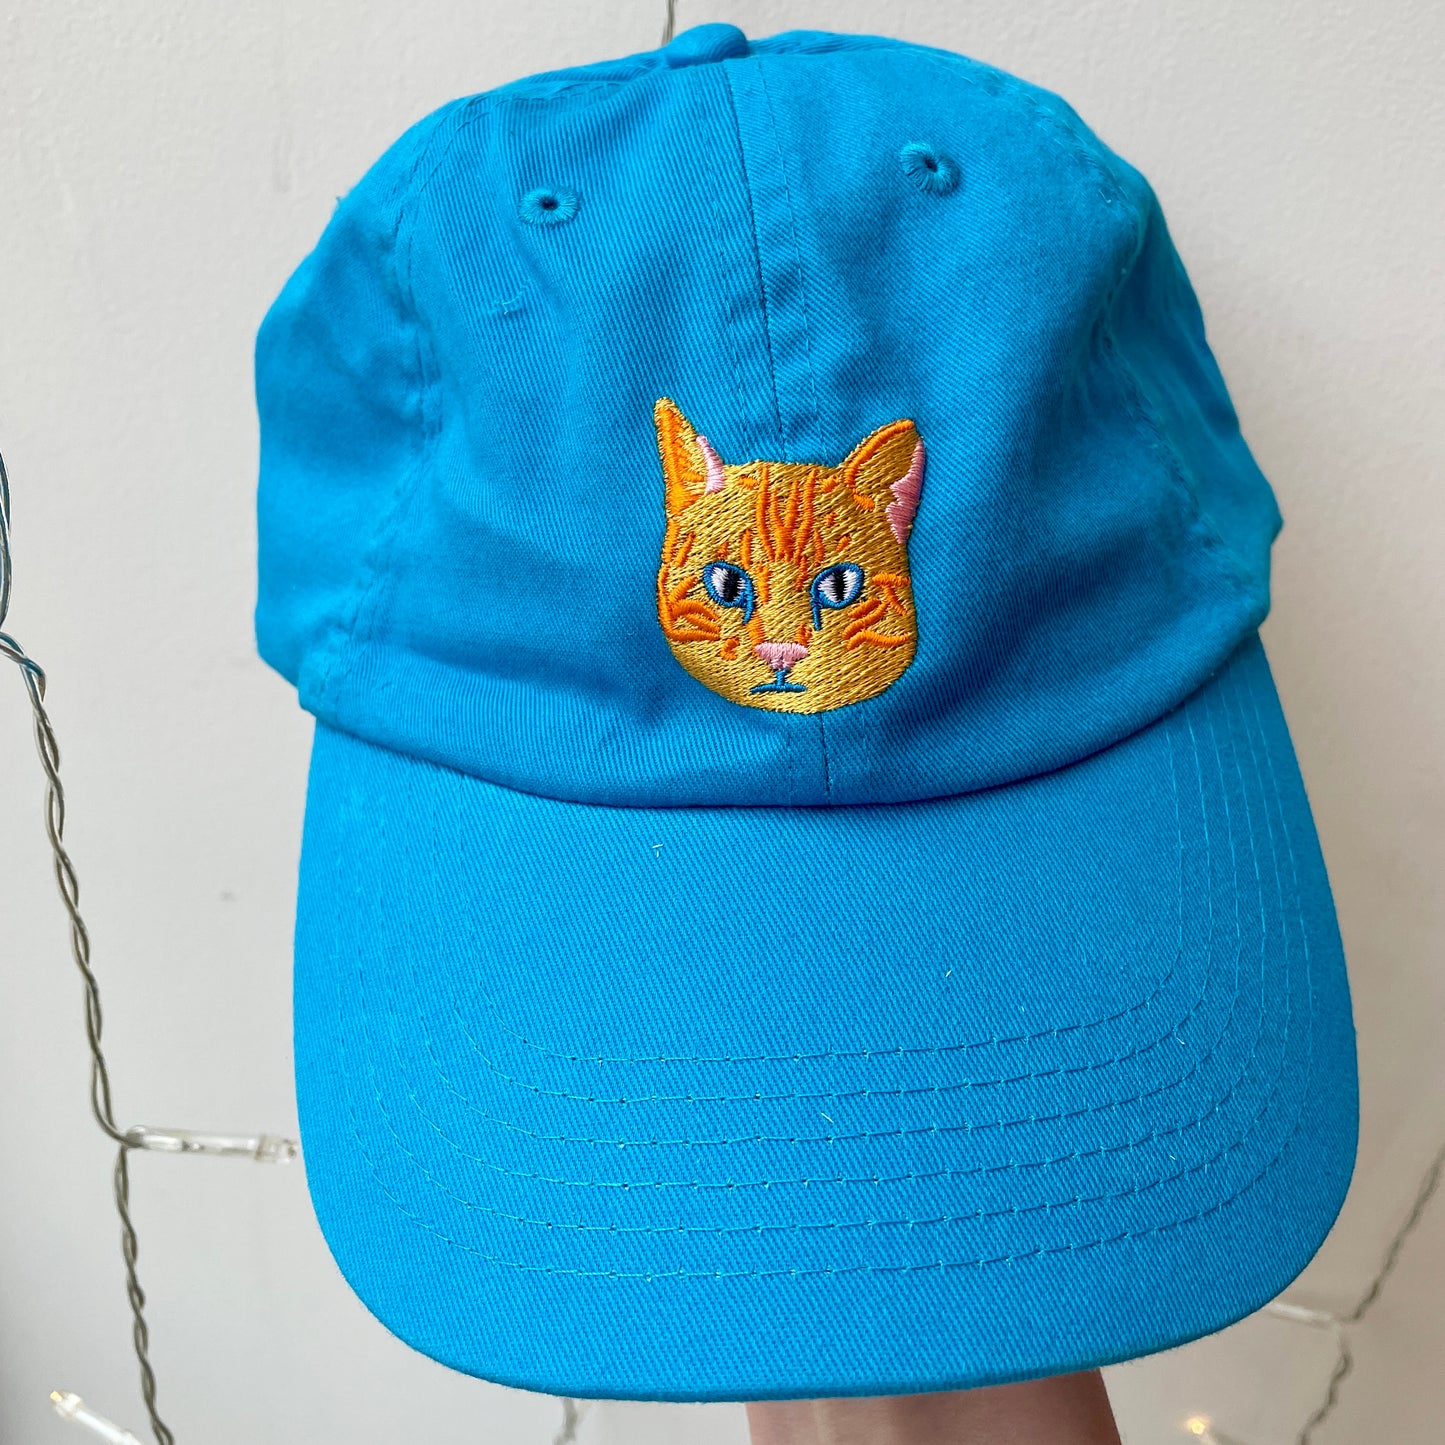 Cats on Hats!